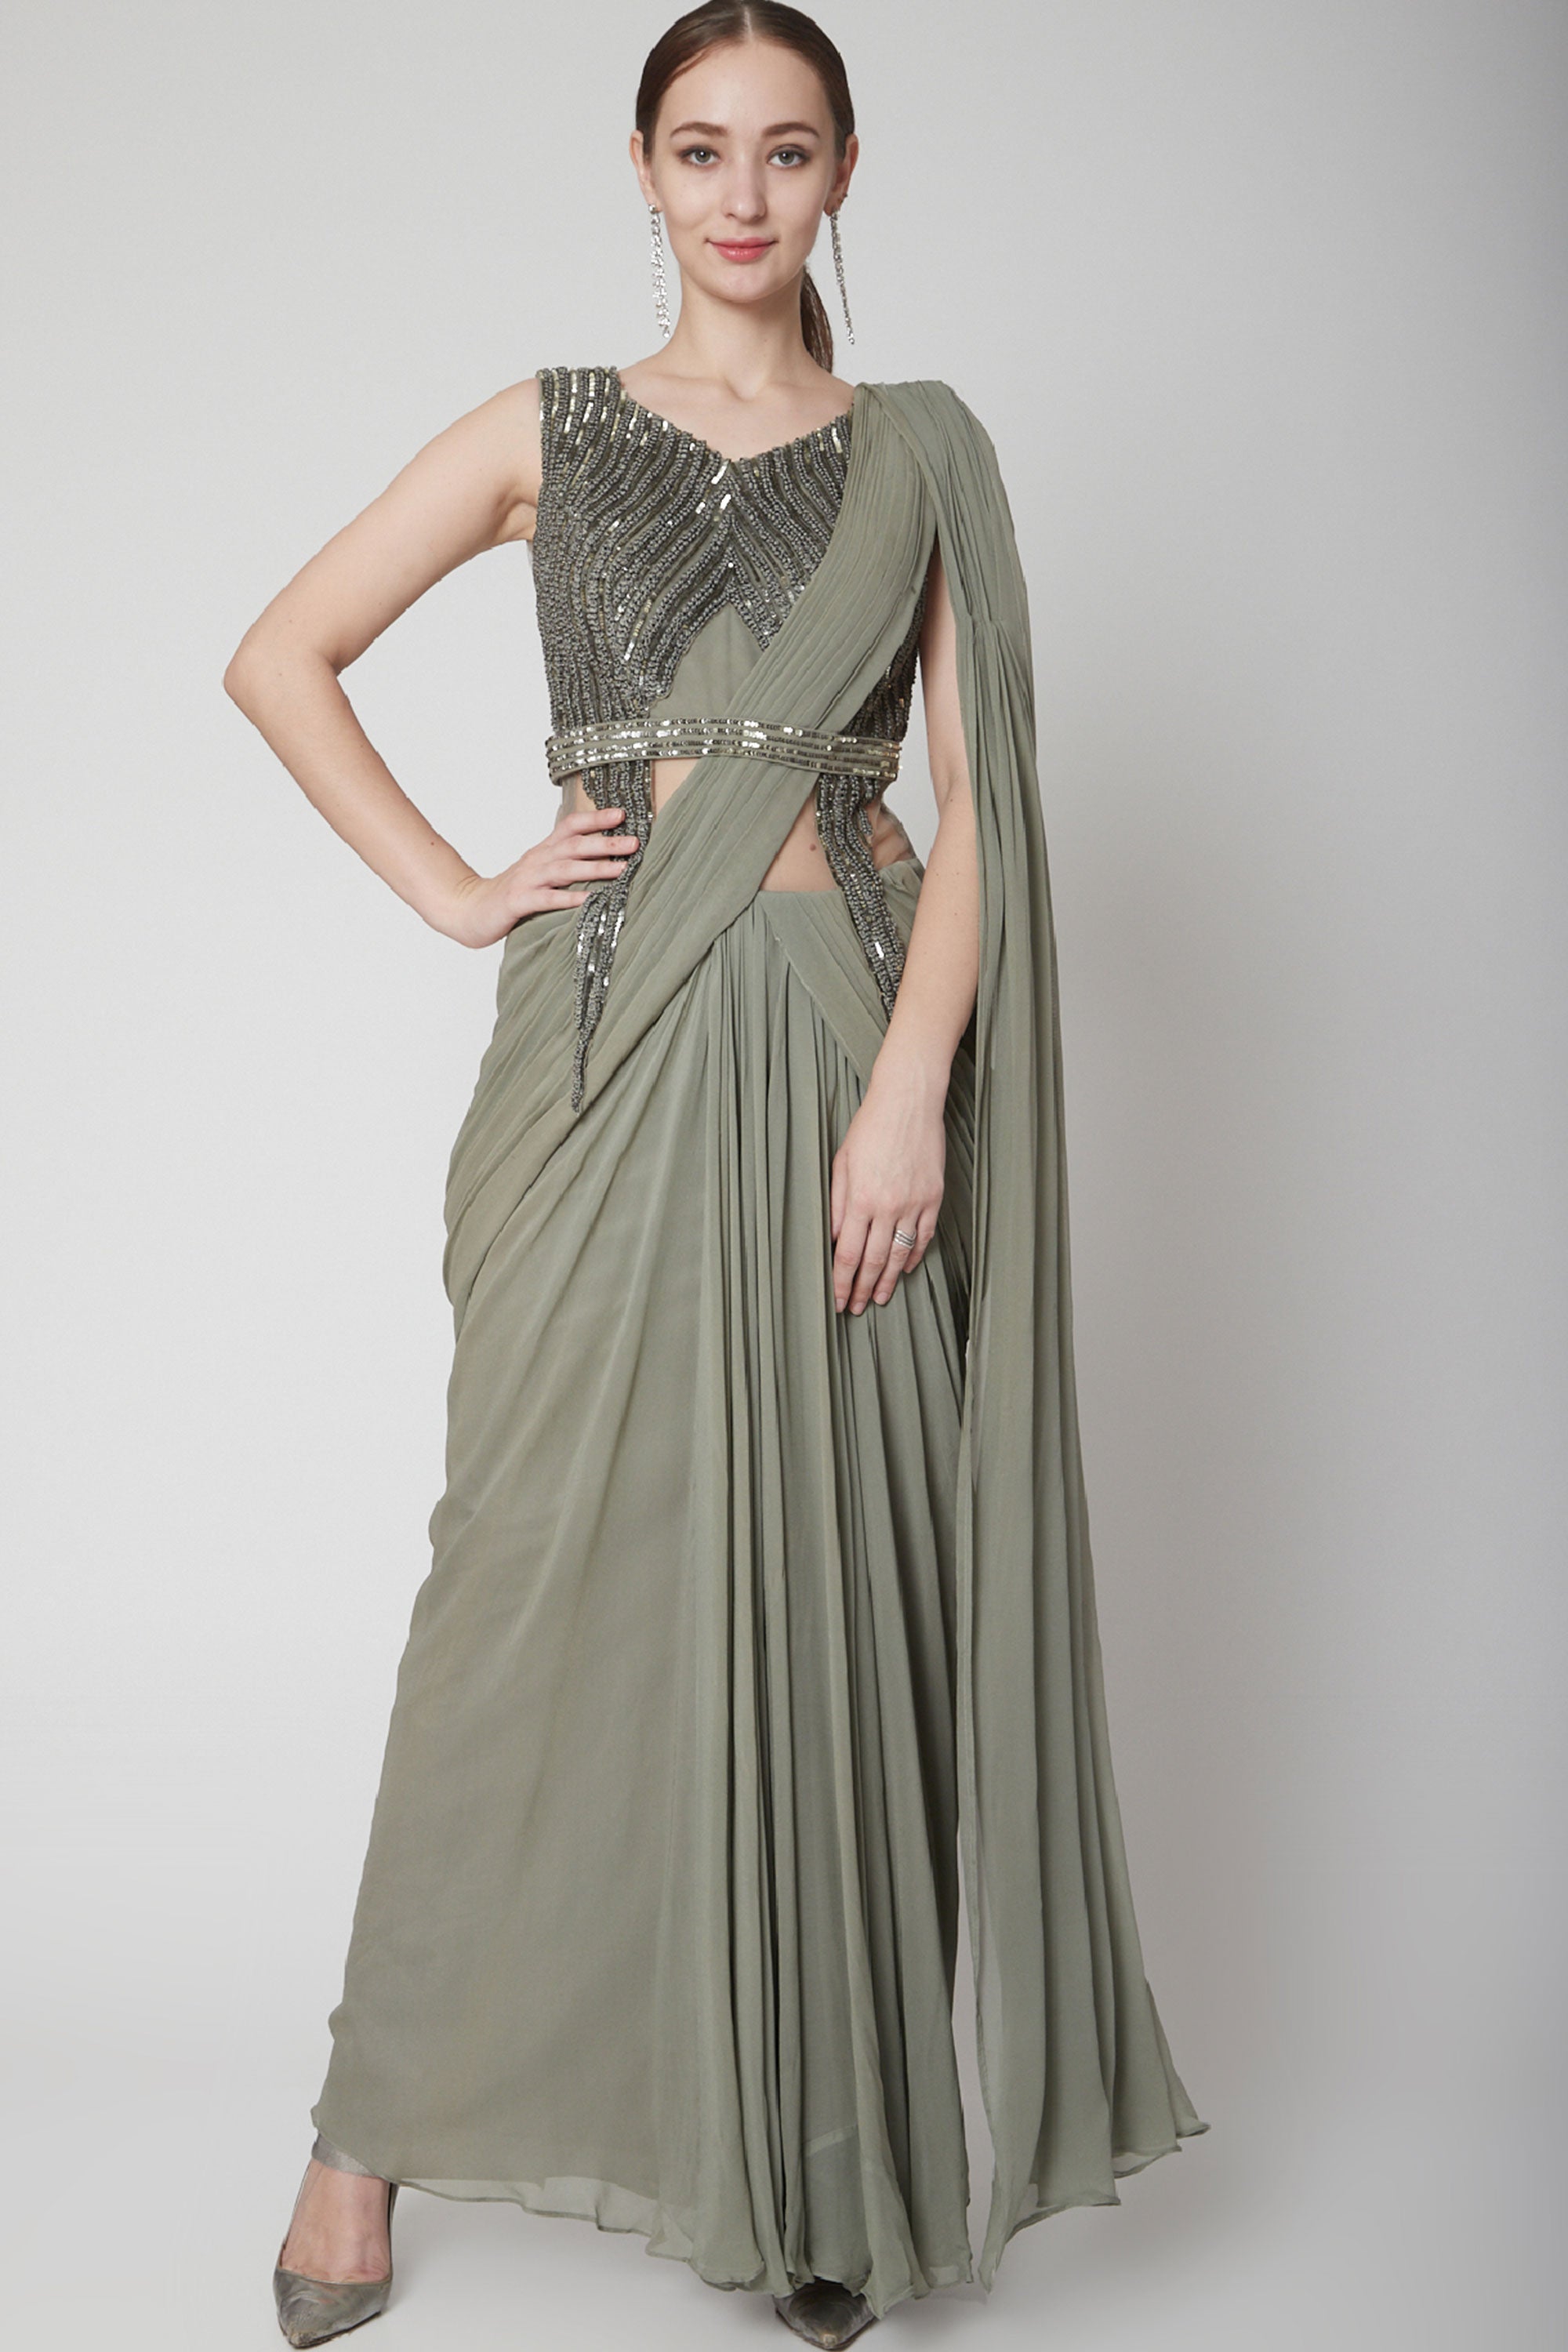 drape saree is made of Georgette.